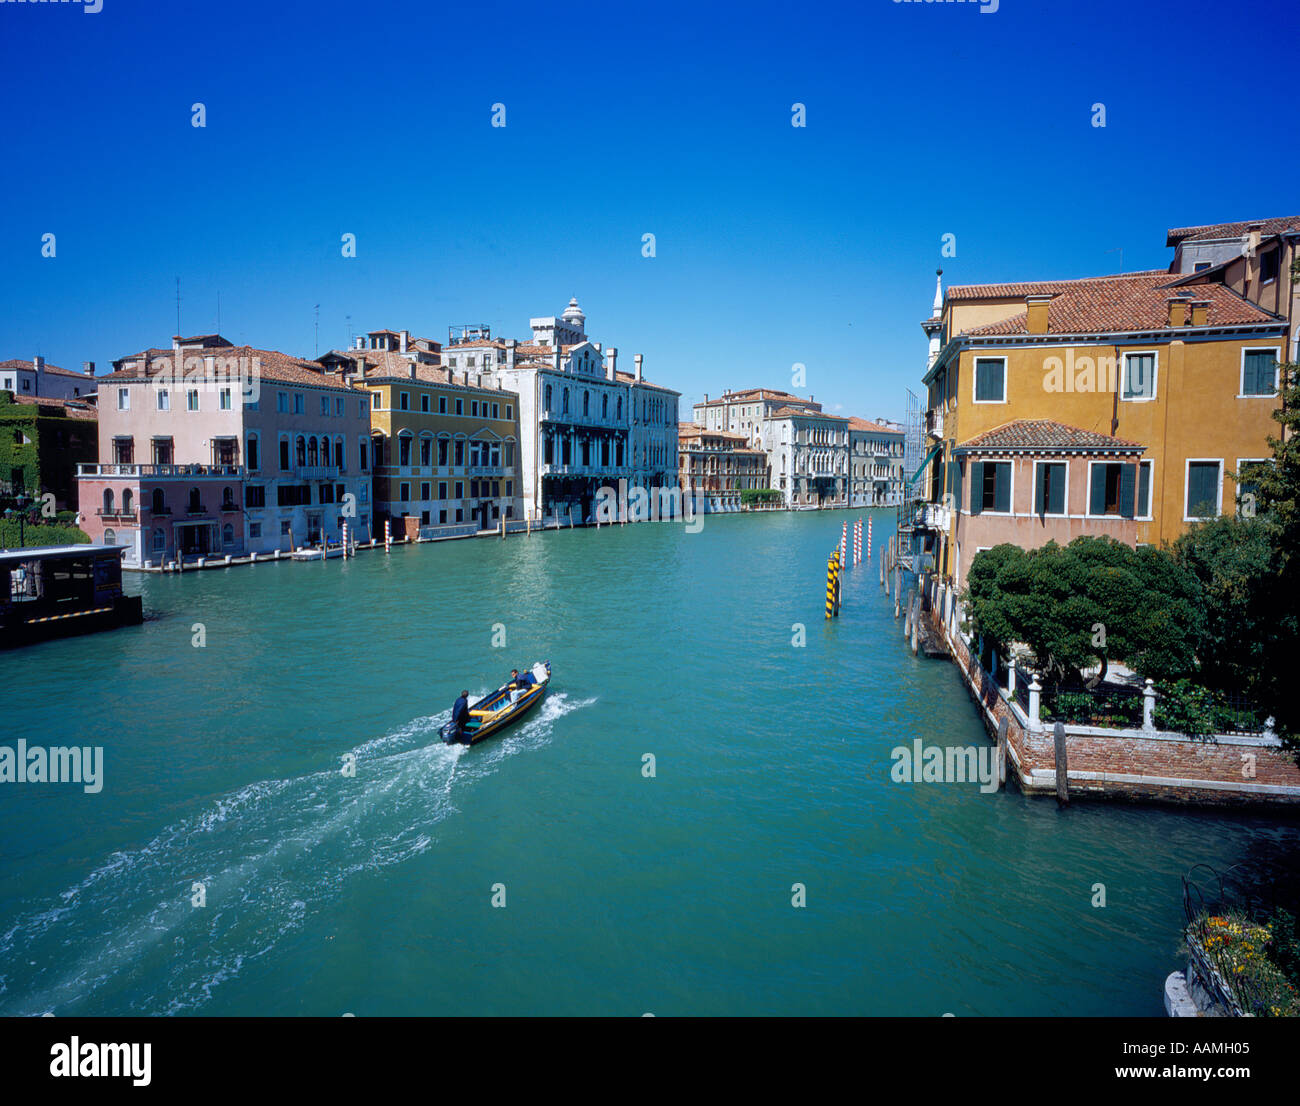 Canal Grande Venice Italy Europe. Photo by Willy Matheisl Stock Photo